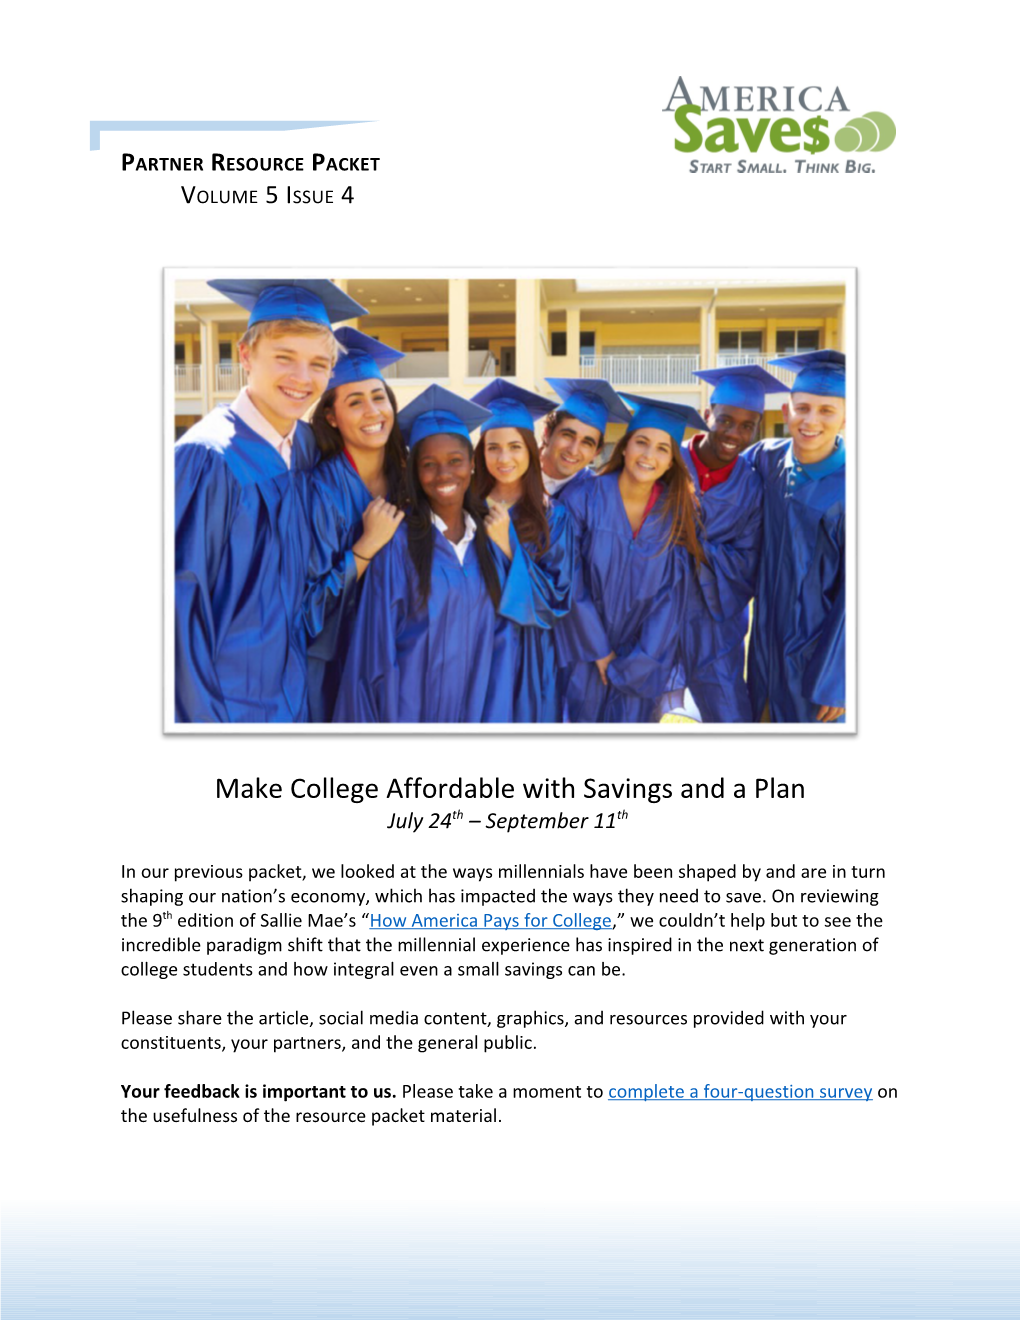 Make College Affordable with Savings and a Plan